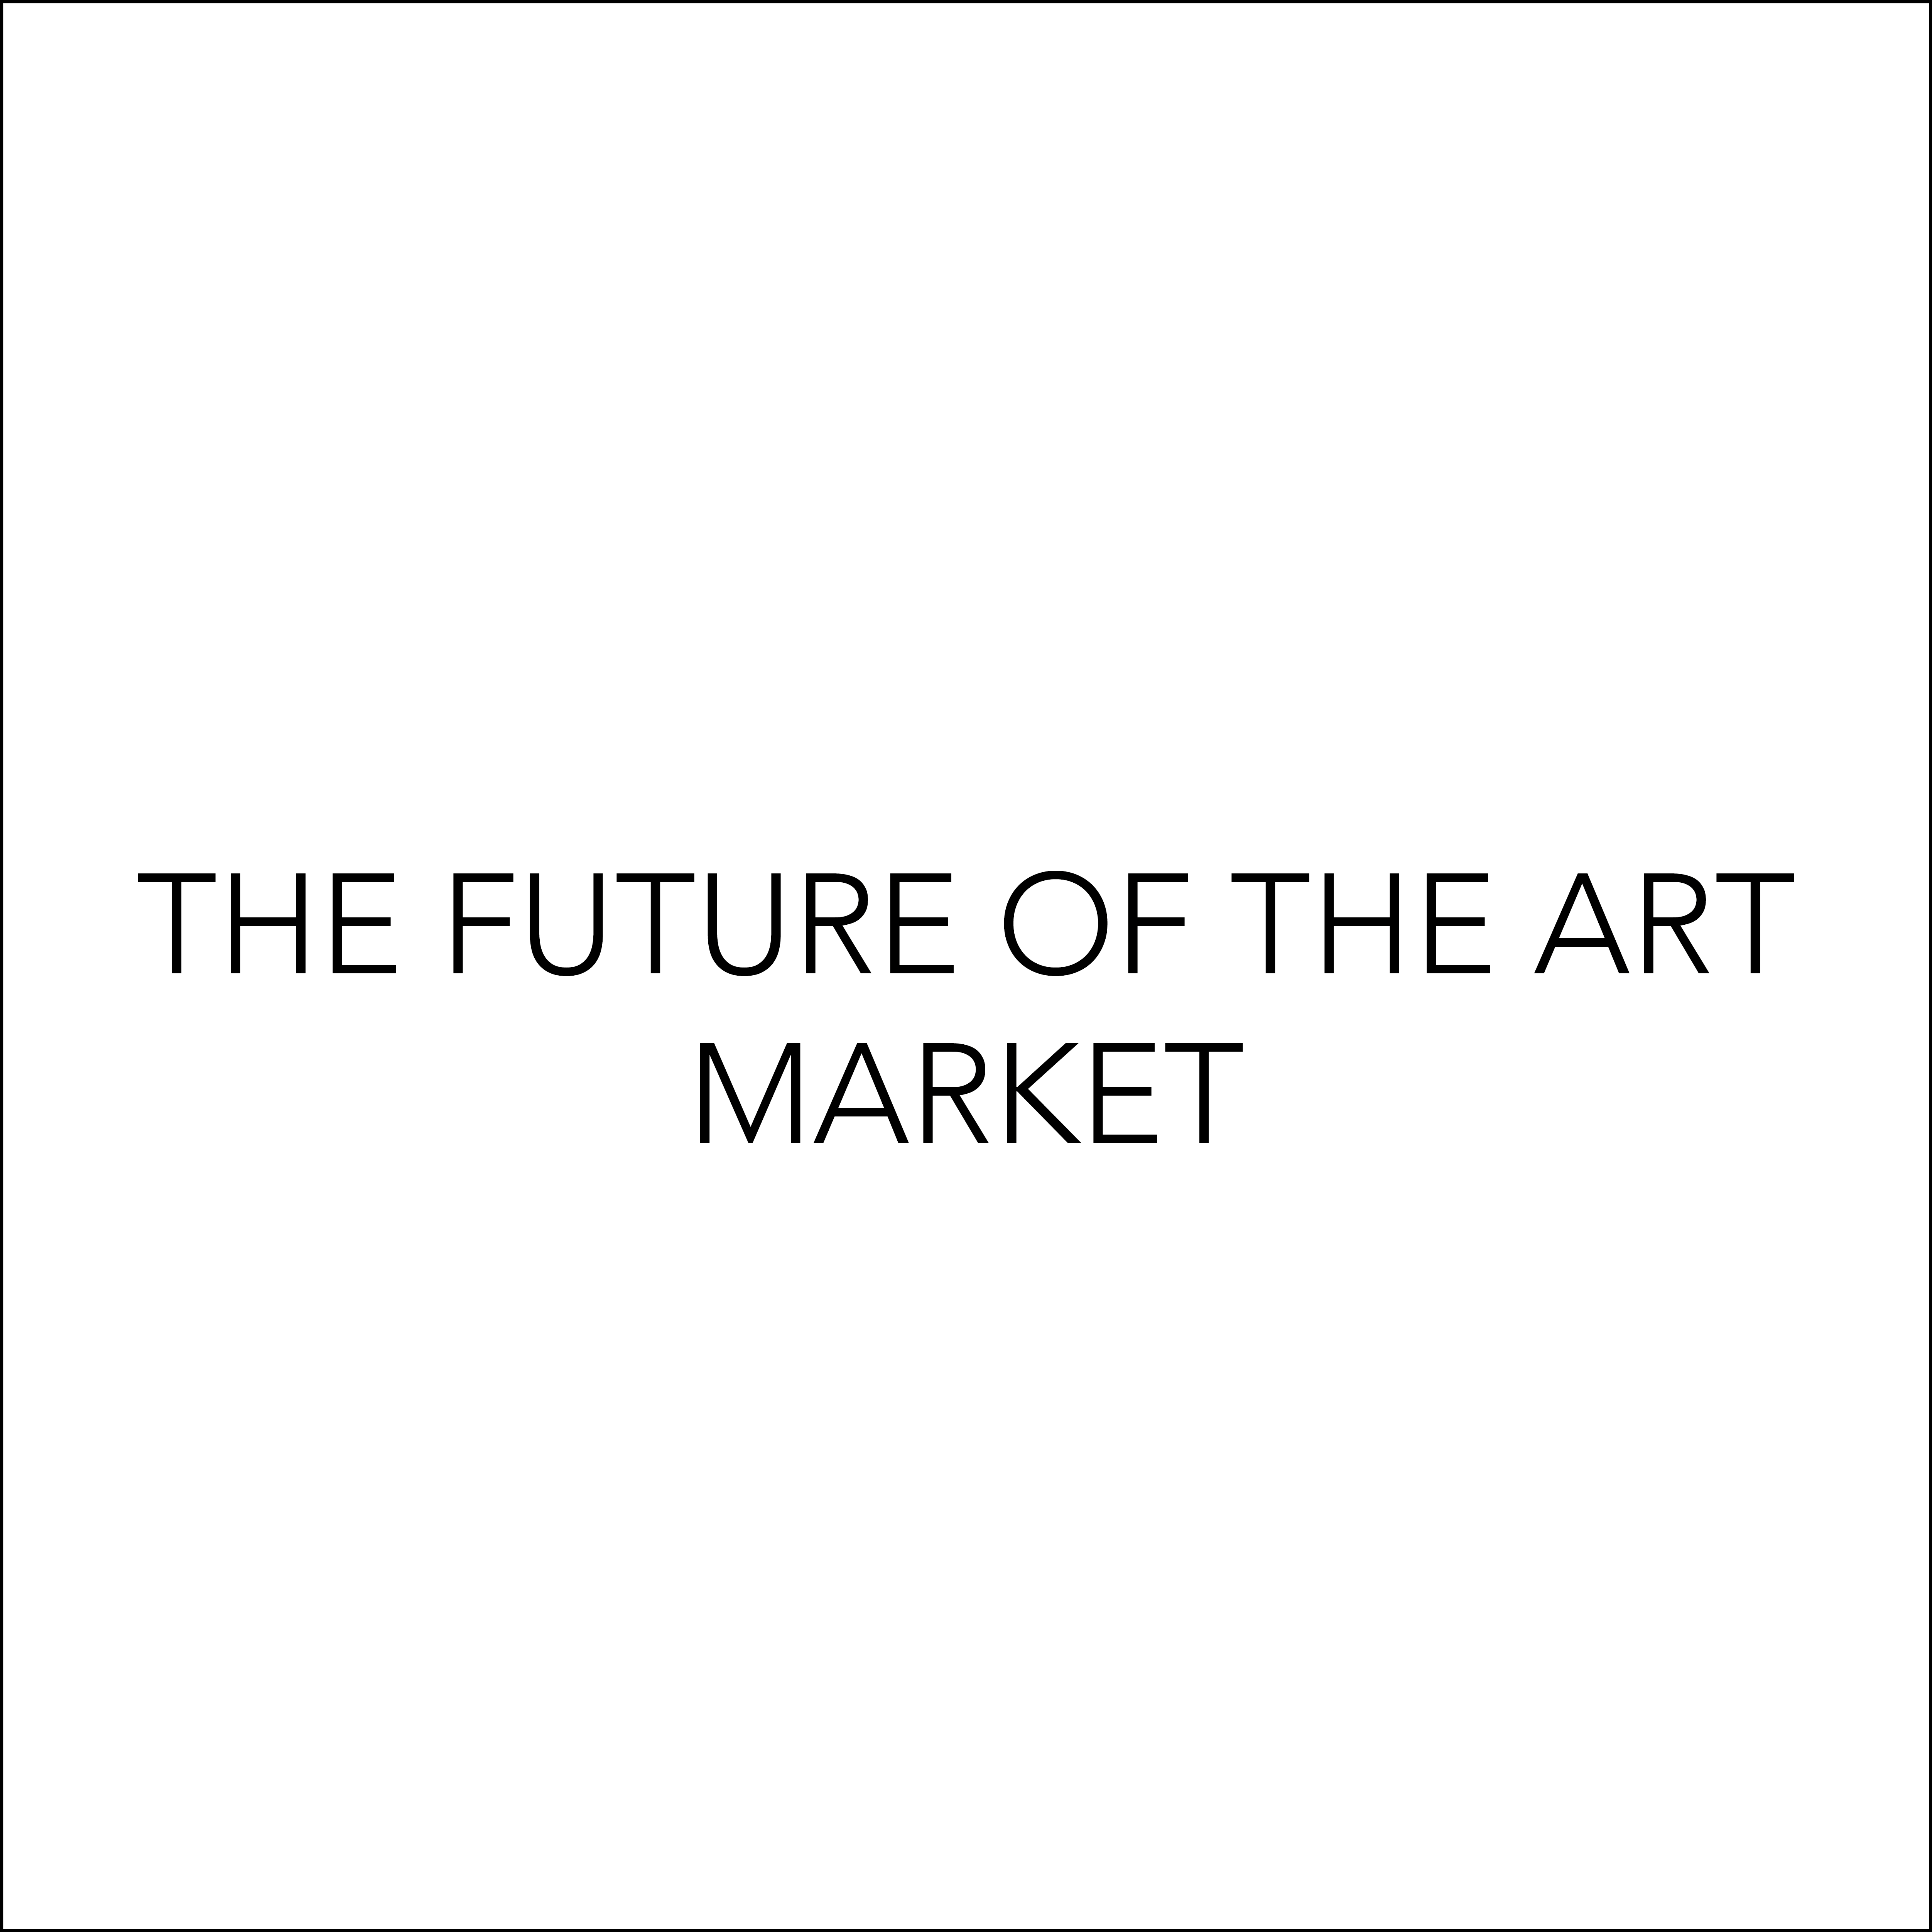 The Future of the Art Market